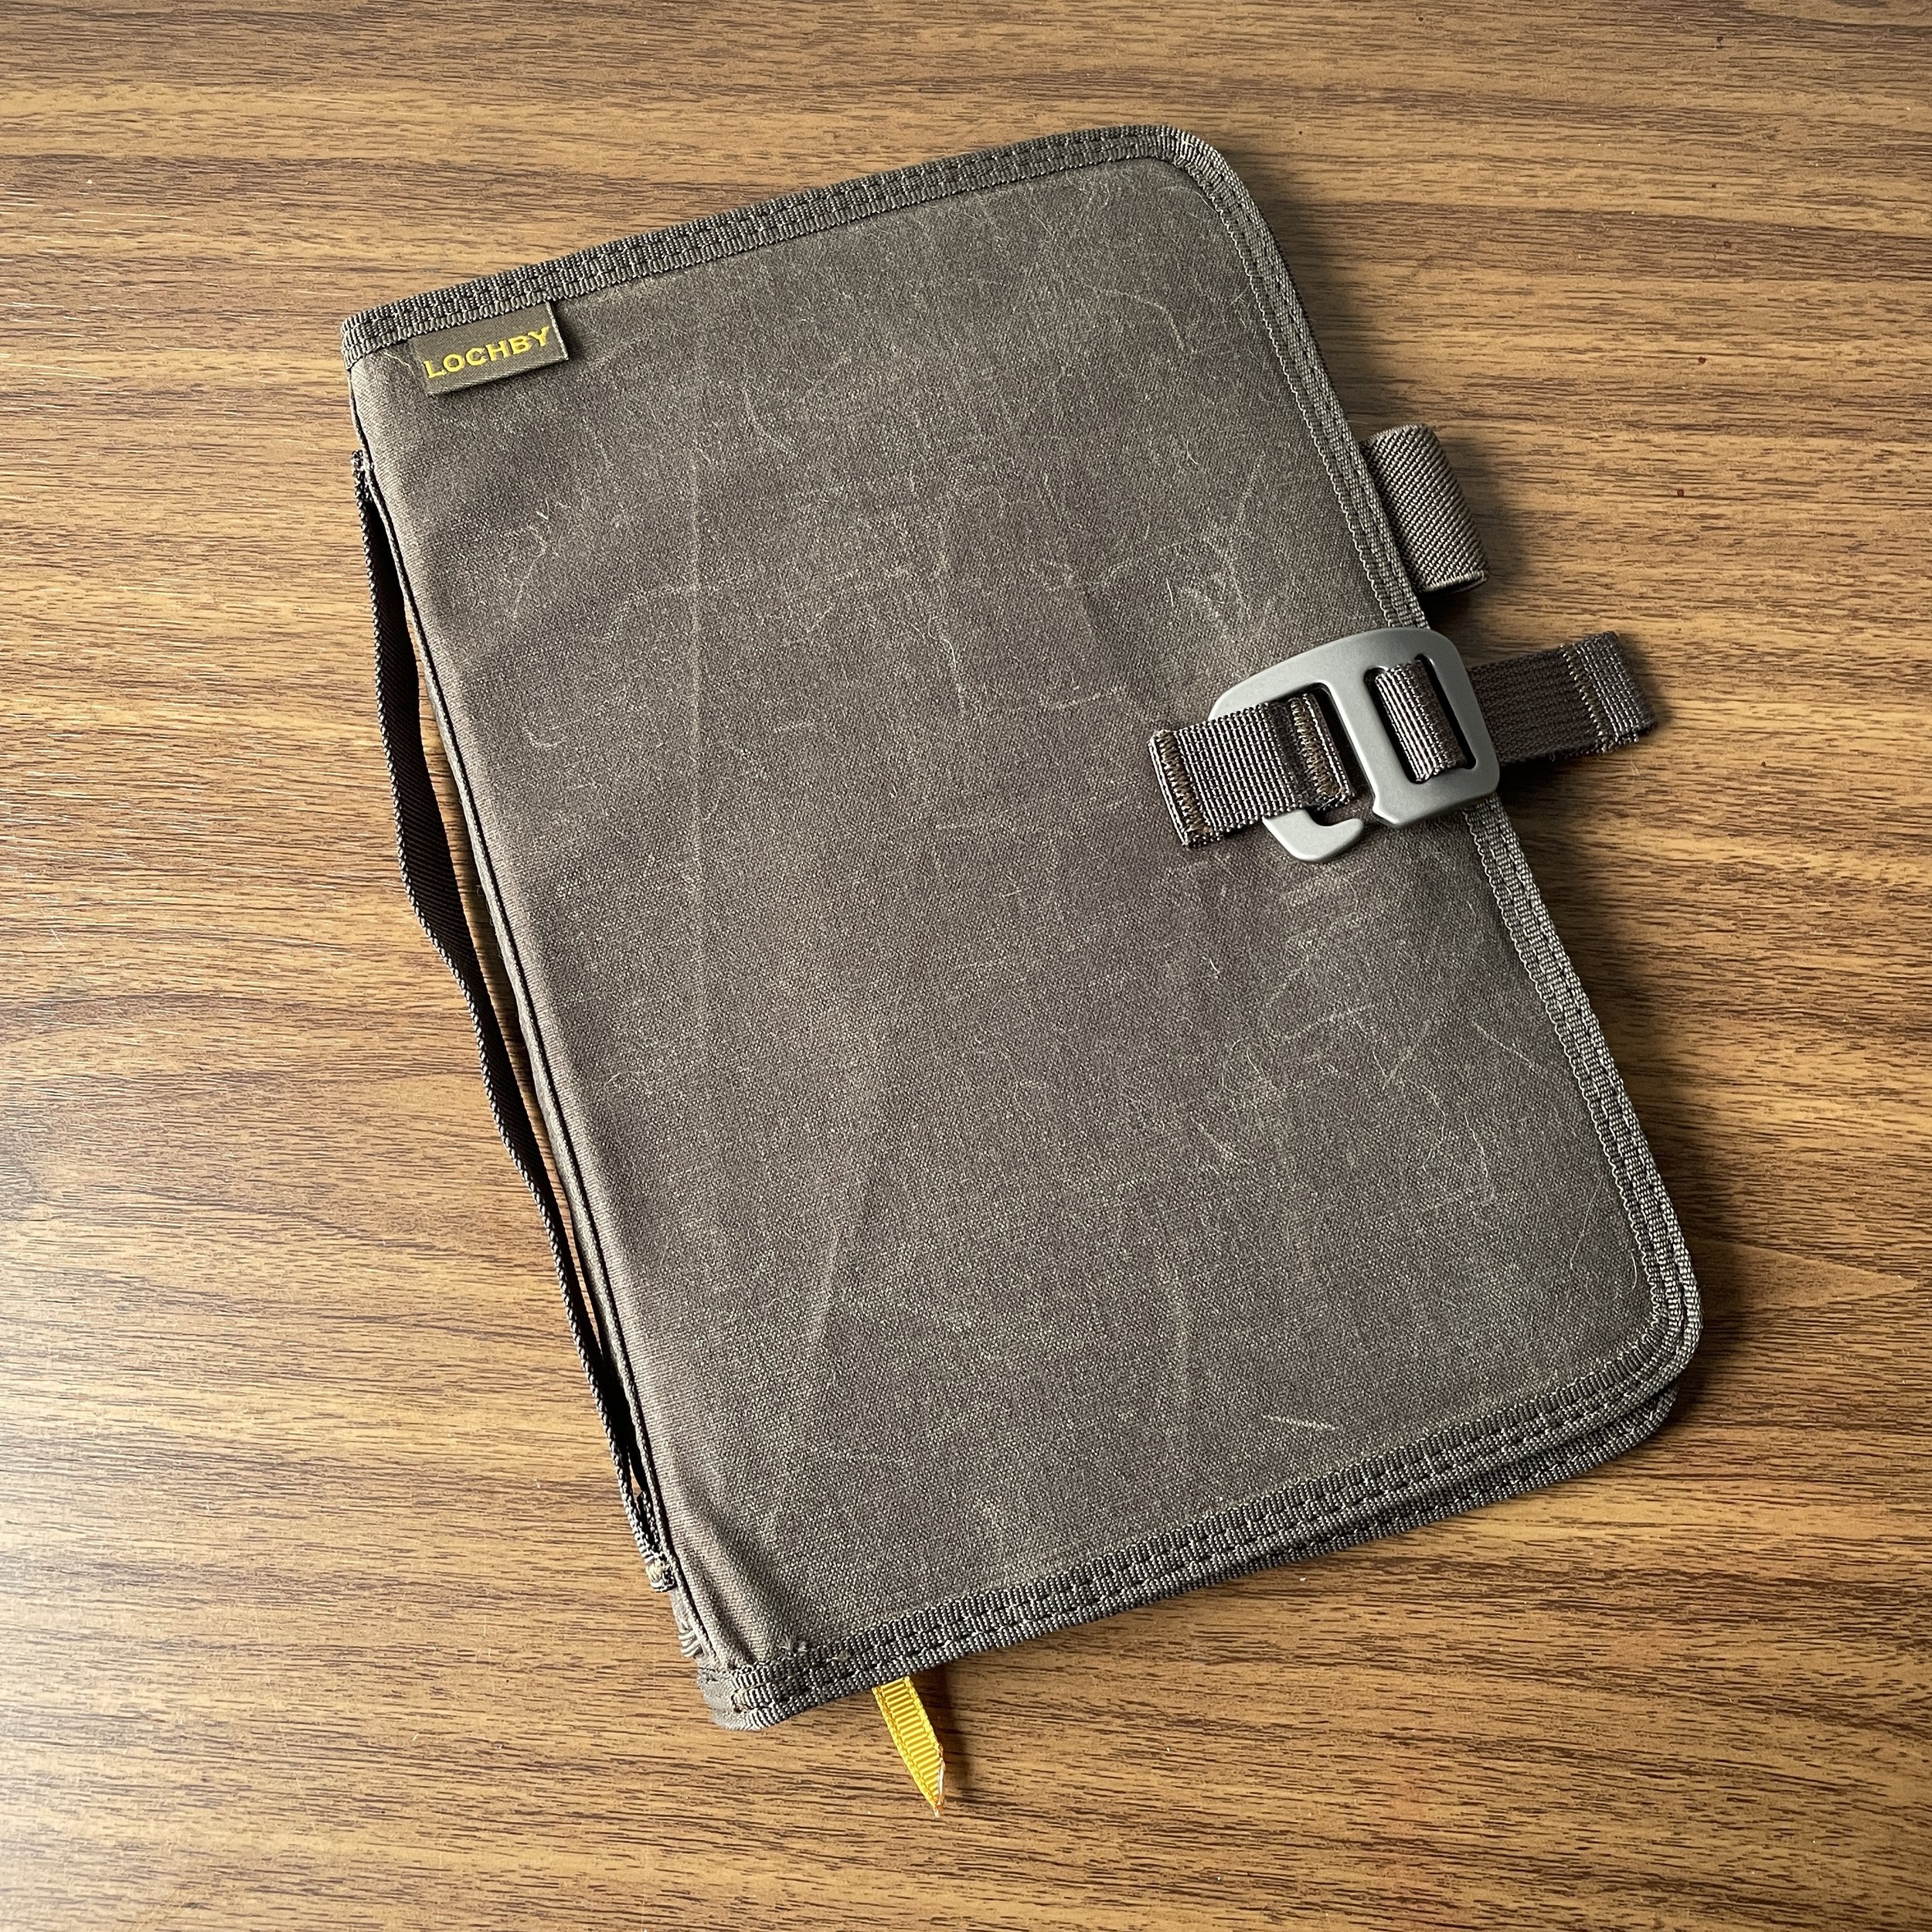 Case Review: Lochby Field Journal Notebook Cover — The Gentleman